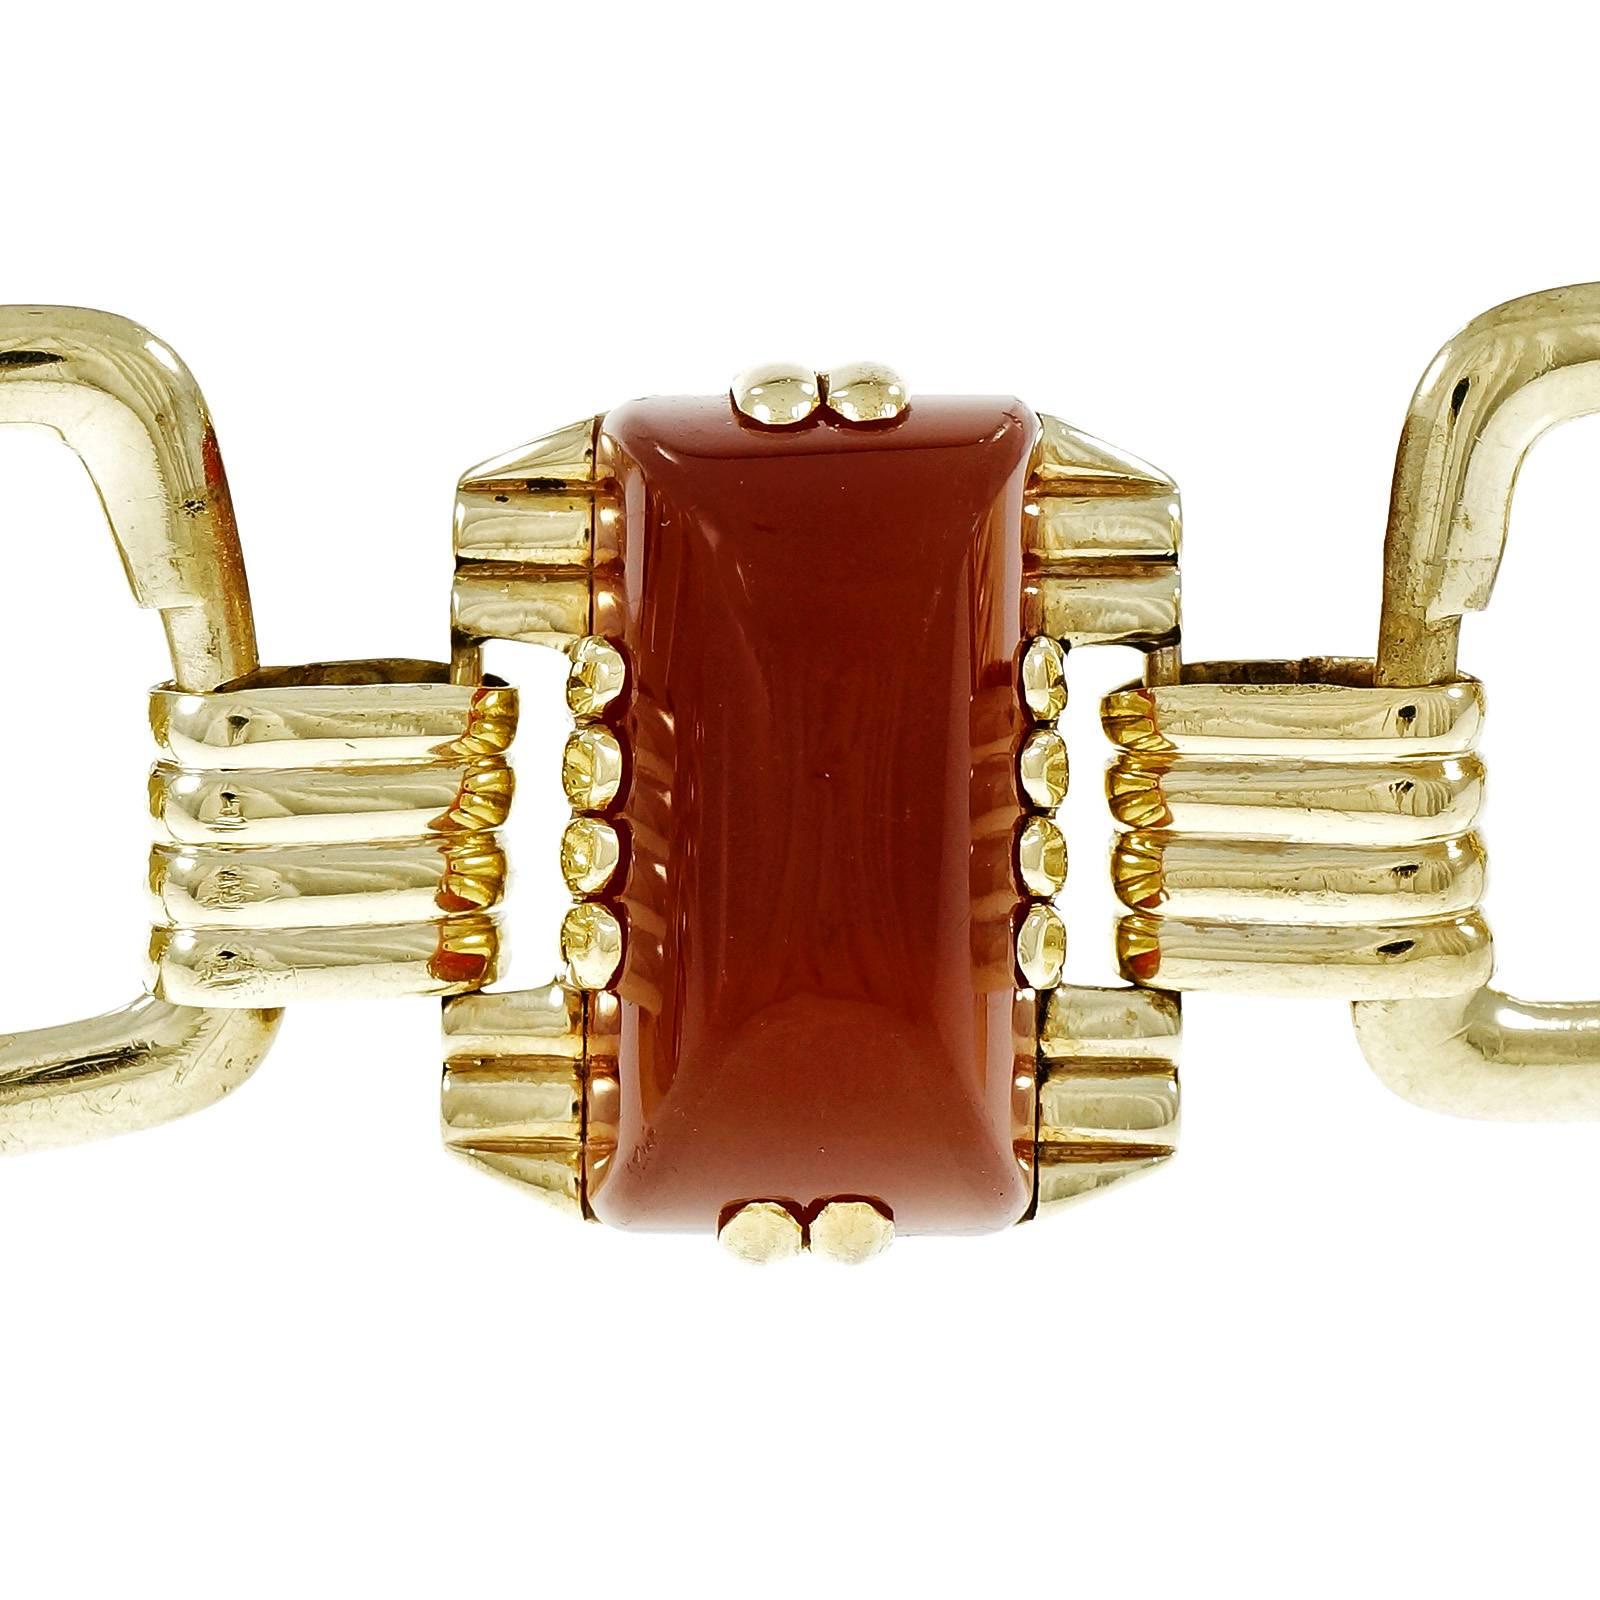 Modernist 1940-1949 Carnelian and Chrysophase bracelet in 14k yellow gold, with a hint of green.  All original including heavy spring ring catch.

1 rectangular sugar loaf Carnelian, 26 x 13.97mm
2 rectangular sugar loaf Chrysophase, 25.84 x